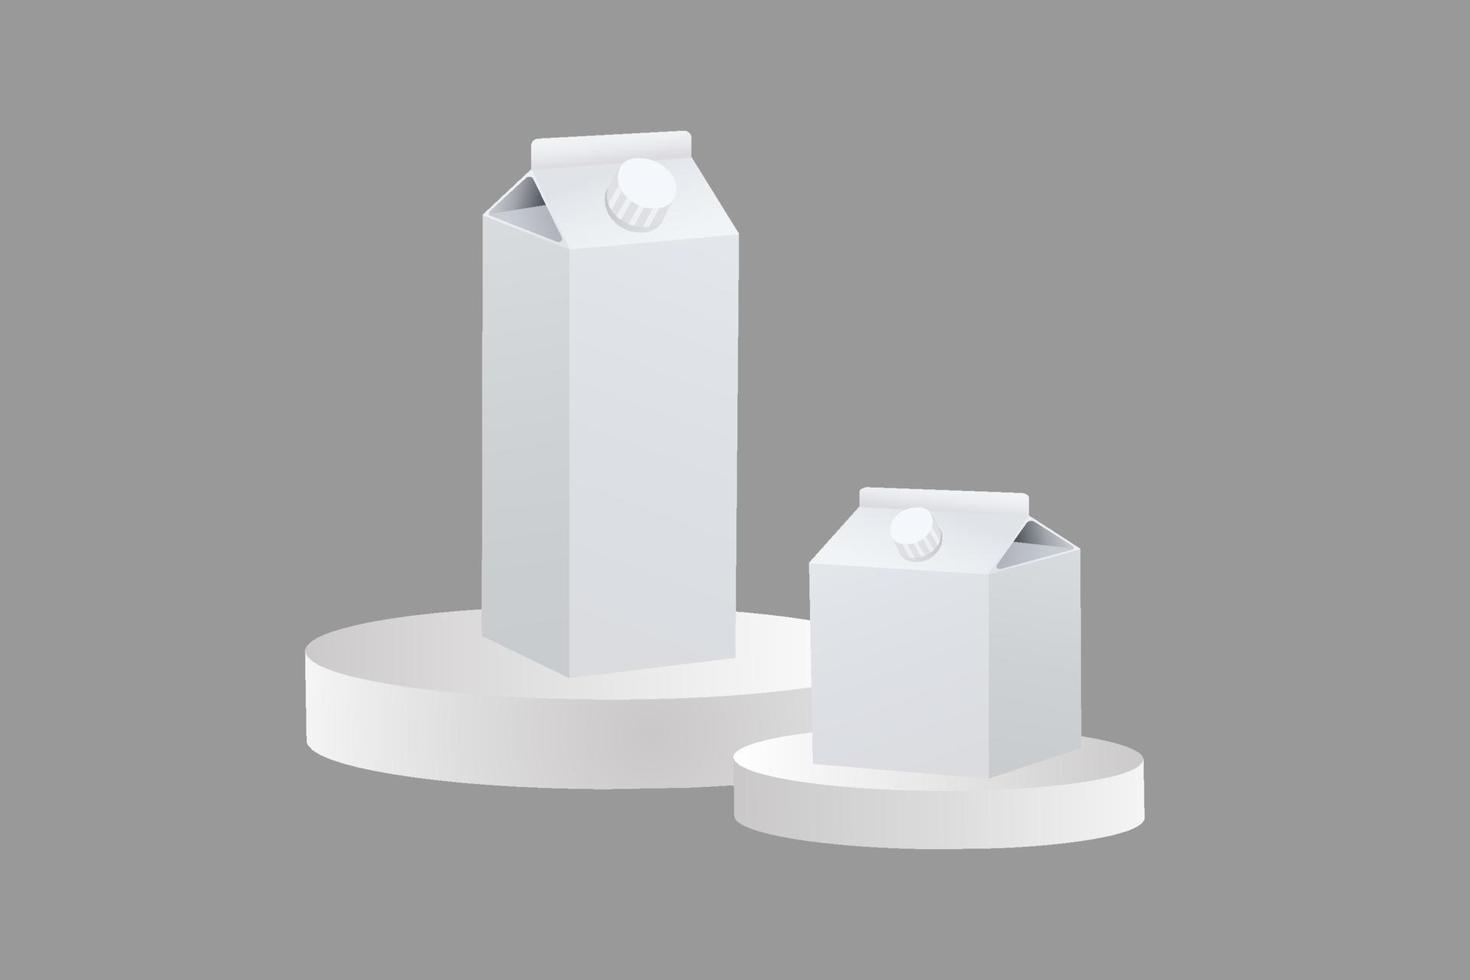 Vertical and square milk box with podiums illustration on isolated background vector